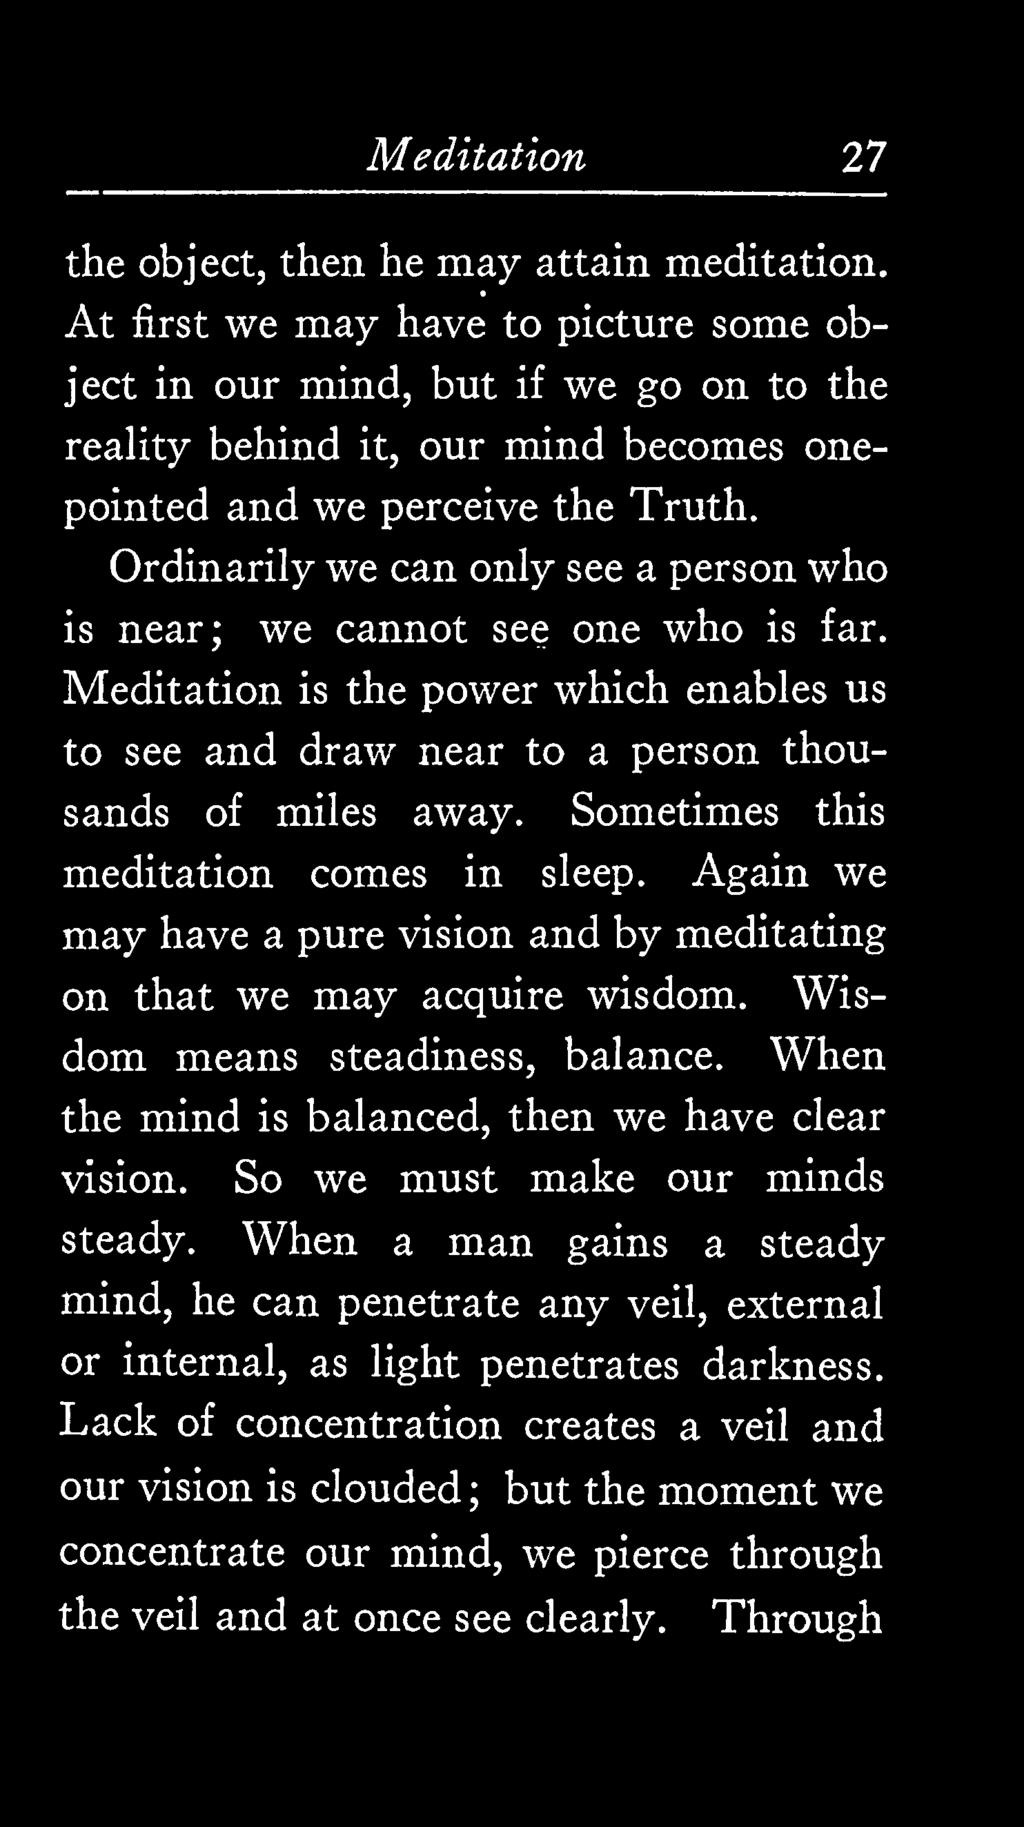 Ordinarily we can only see a person who is near; we cannot see one who is far. Meditation is the power which enables us to see and draw near to a person thousands of miles away.